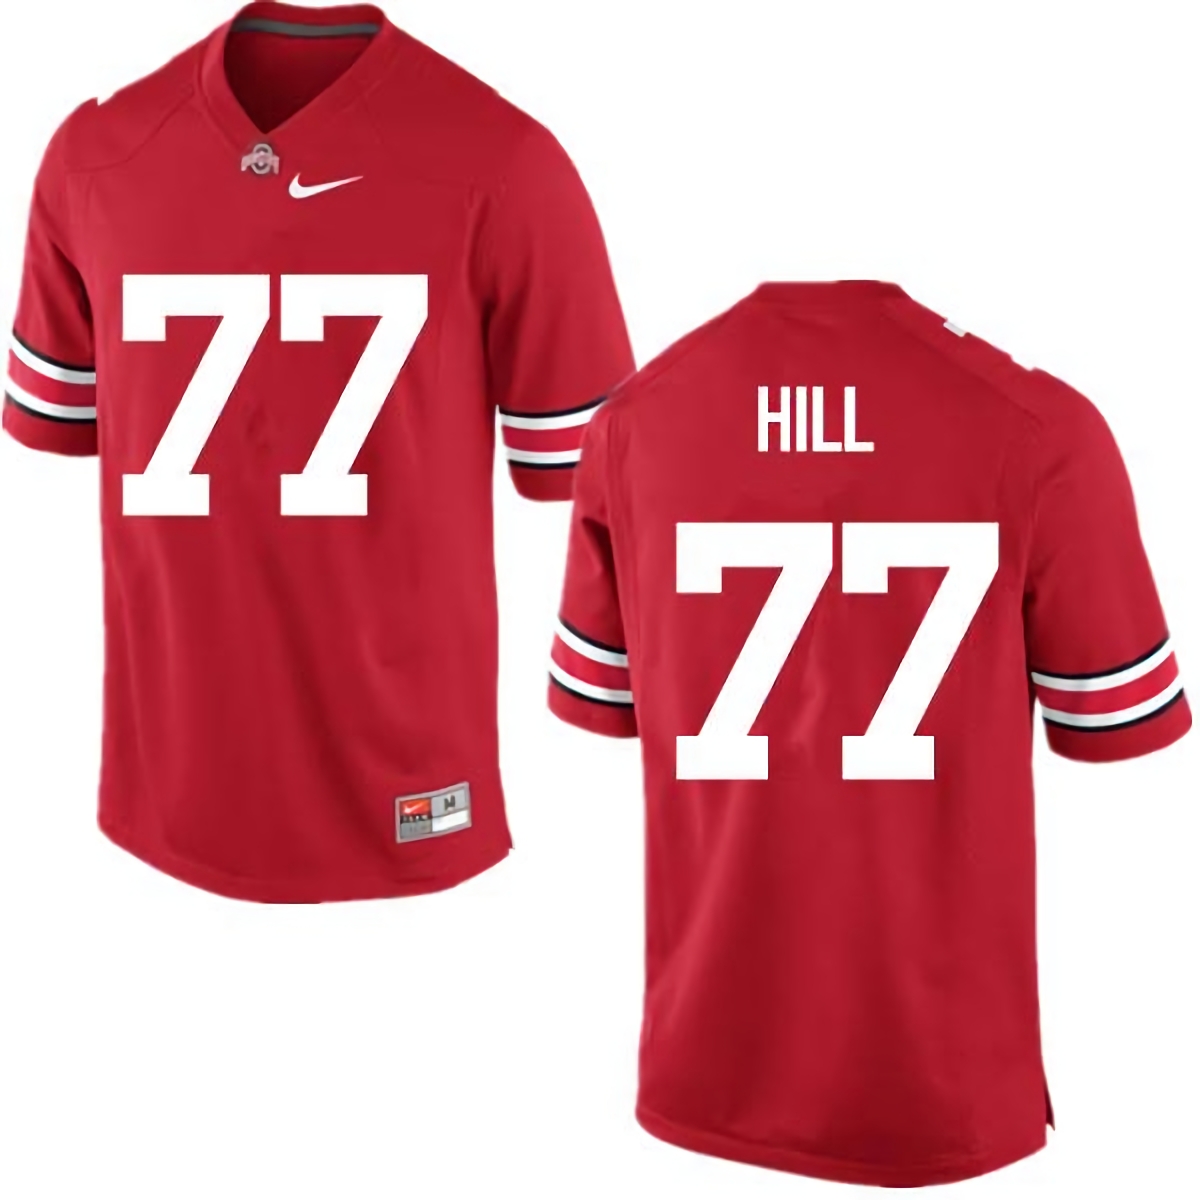 Michael Hill Ohio State Buckeyes Men's NCAA #77 Nike Red College Stitched Football Jersey JWL8156QT